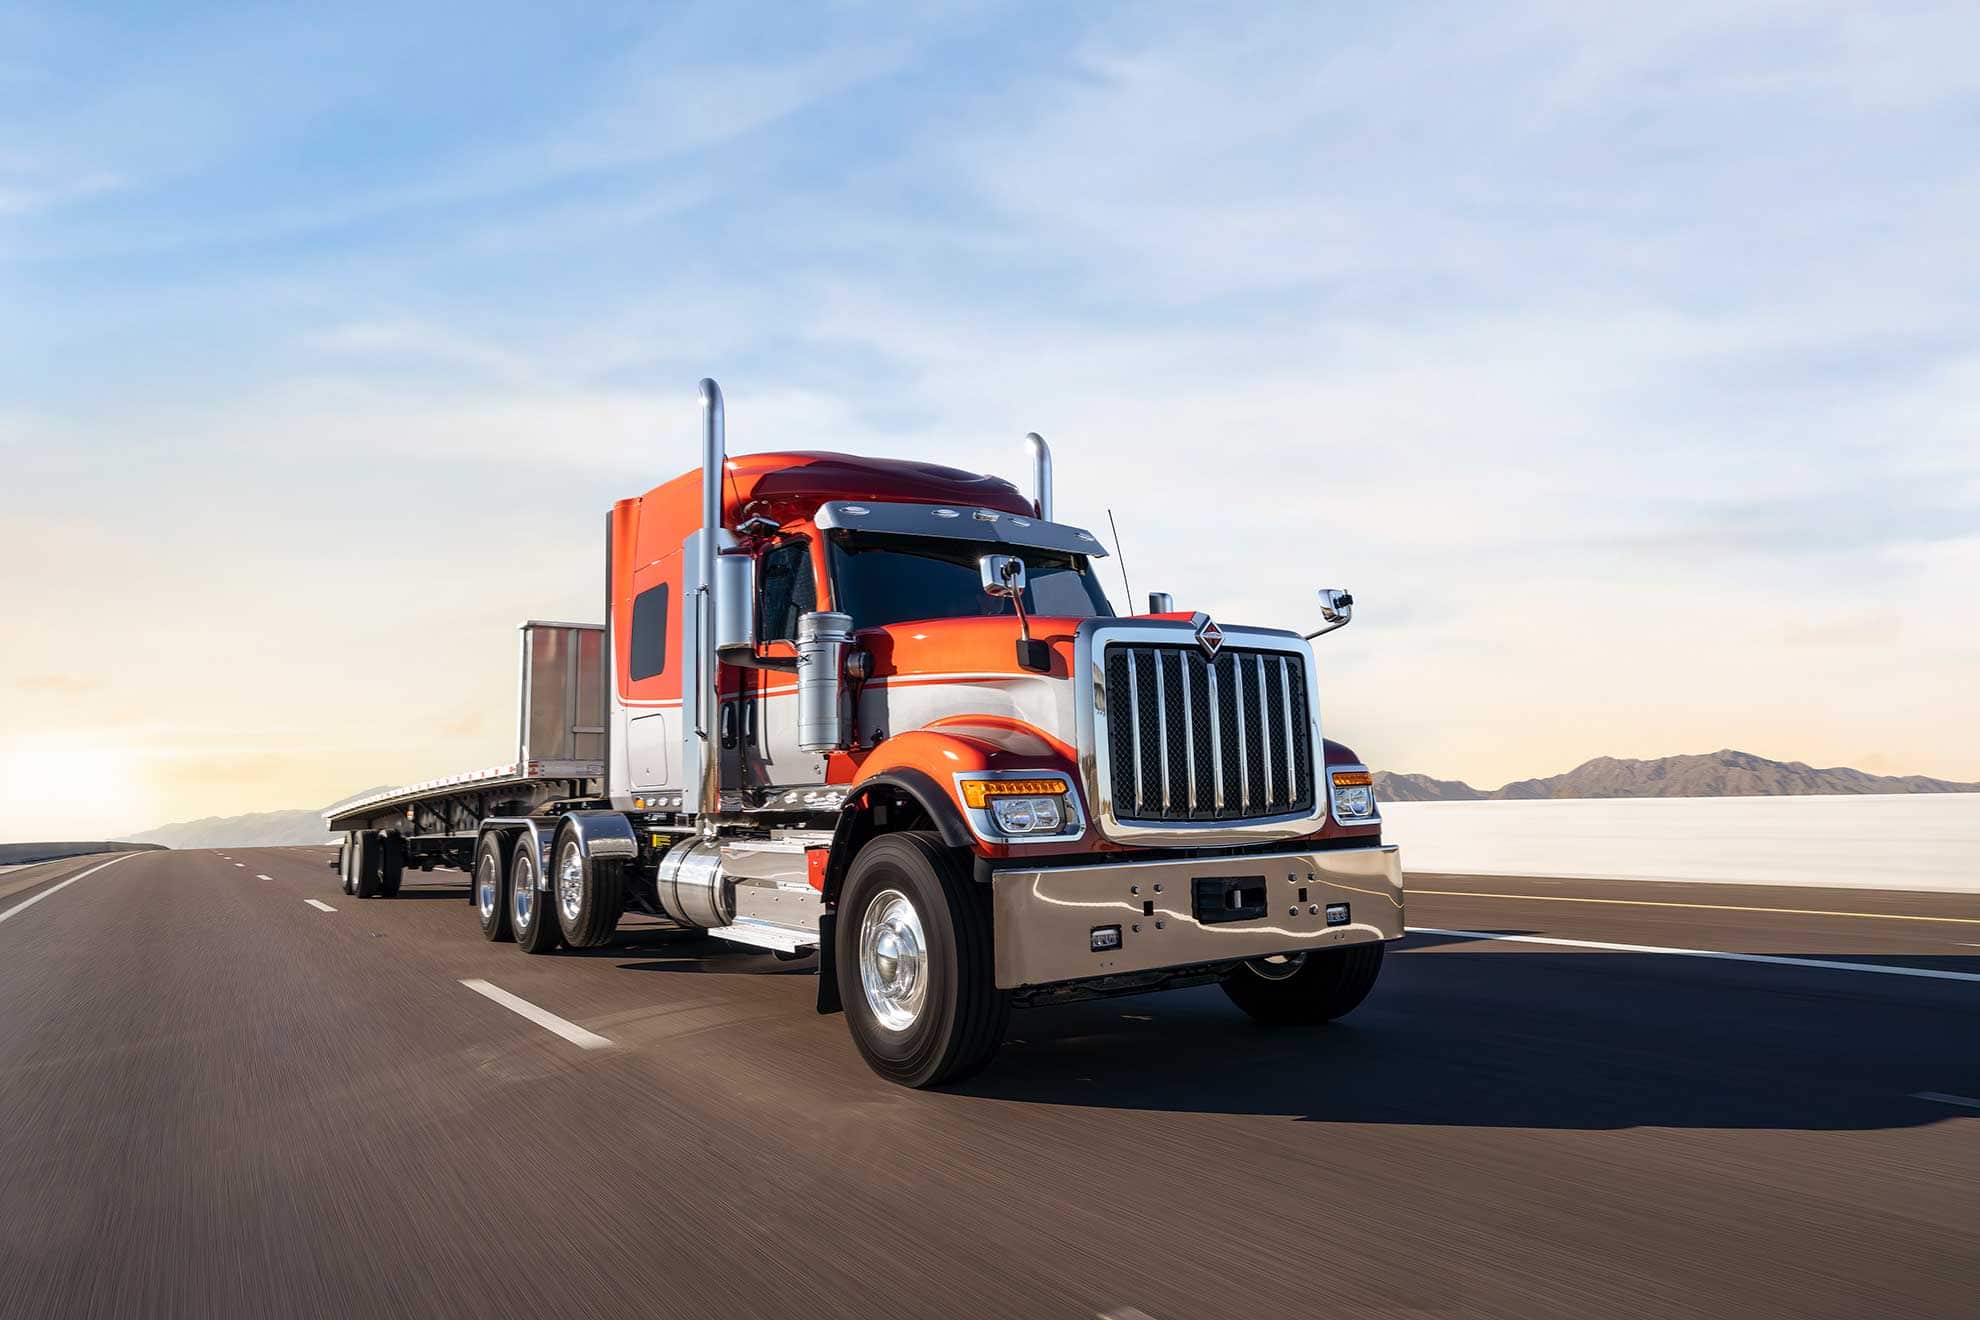 International HX Sleeper Semi Truck driving down the highway is a great example of the types of heavy duty trucks you can purchase at our dealership.